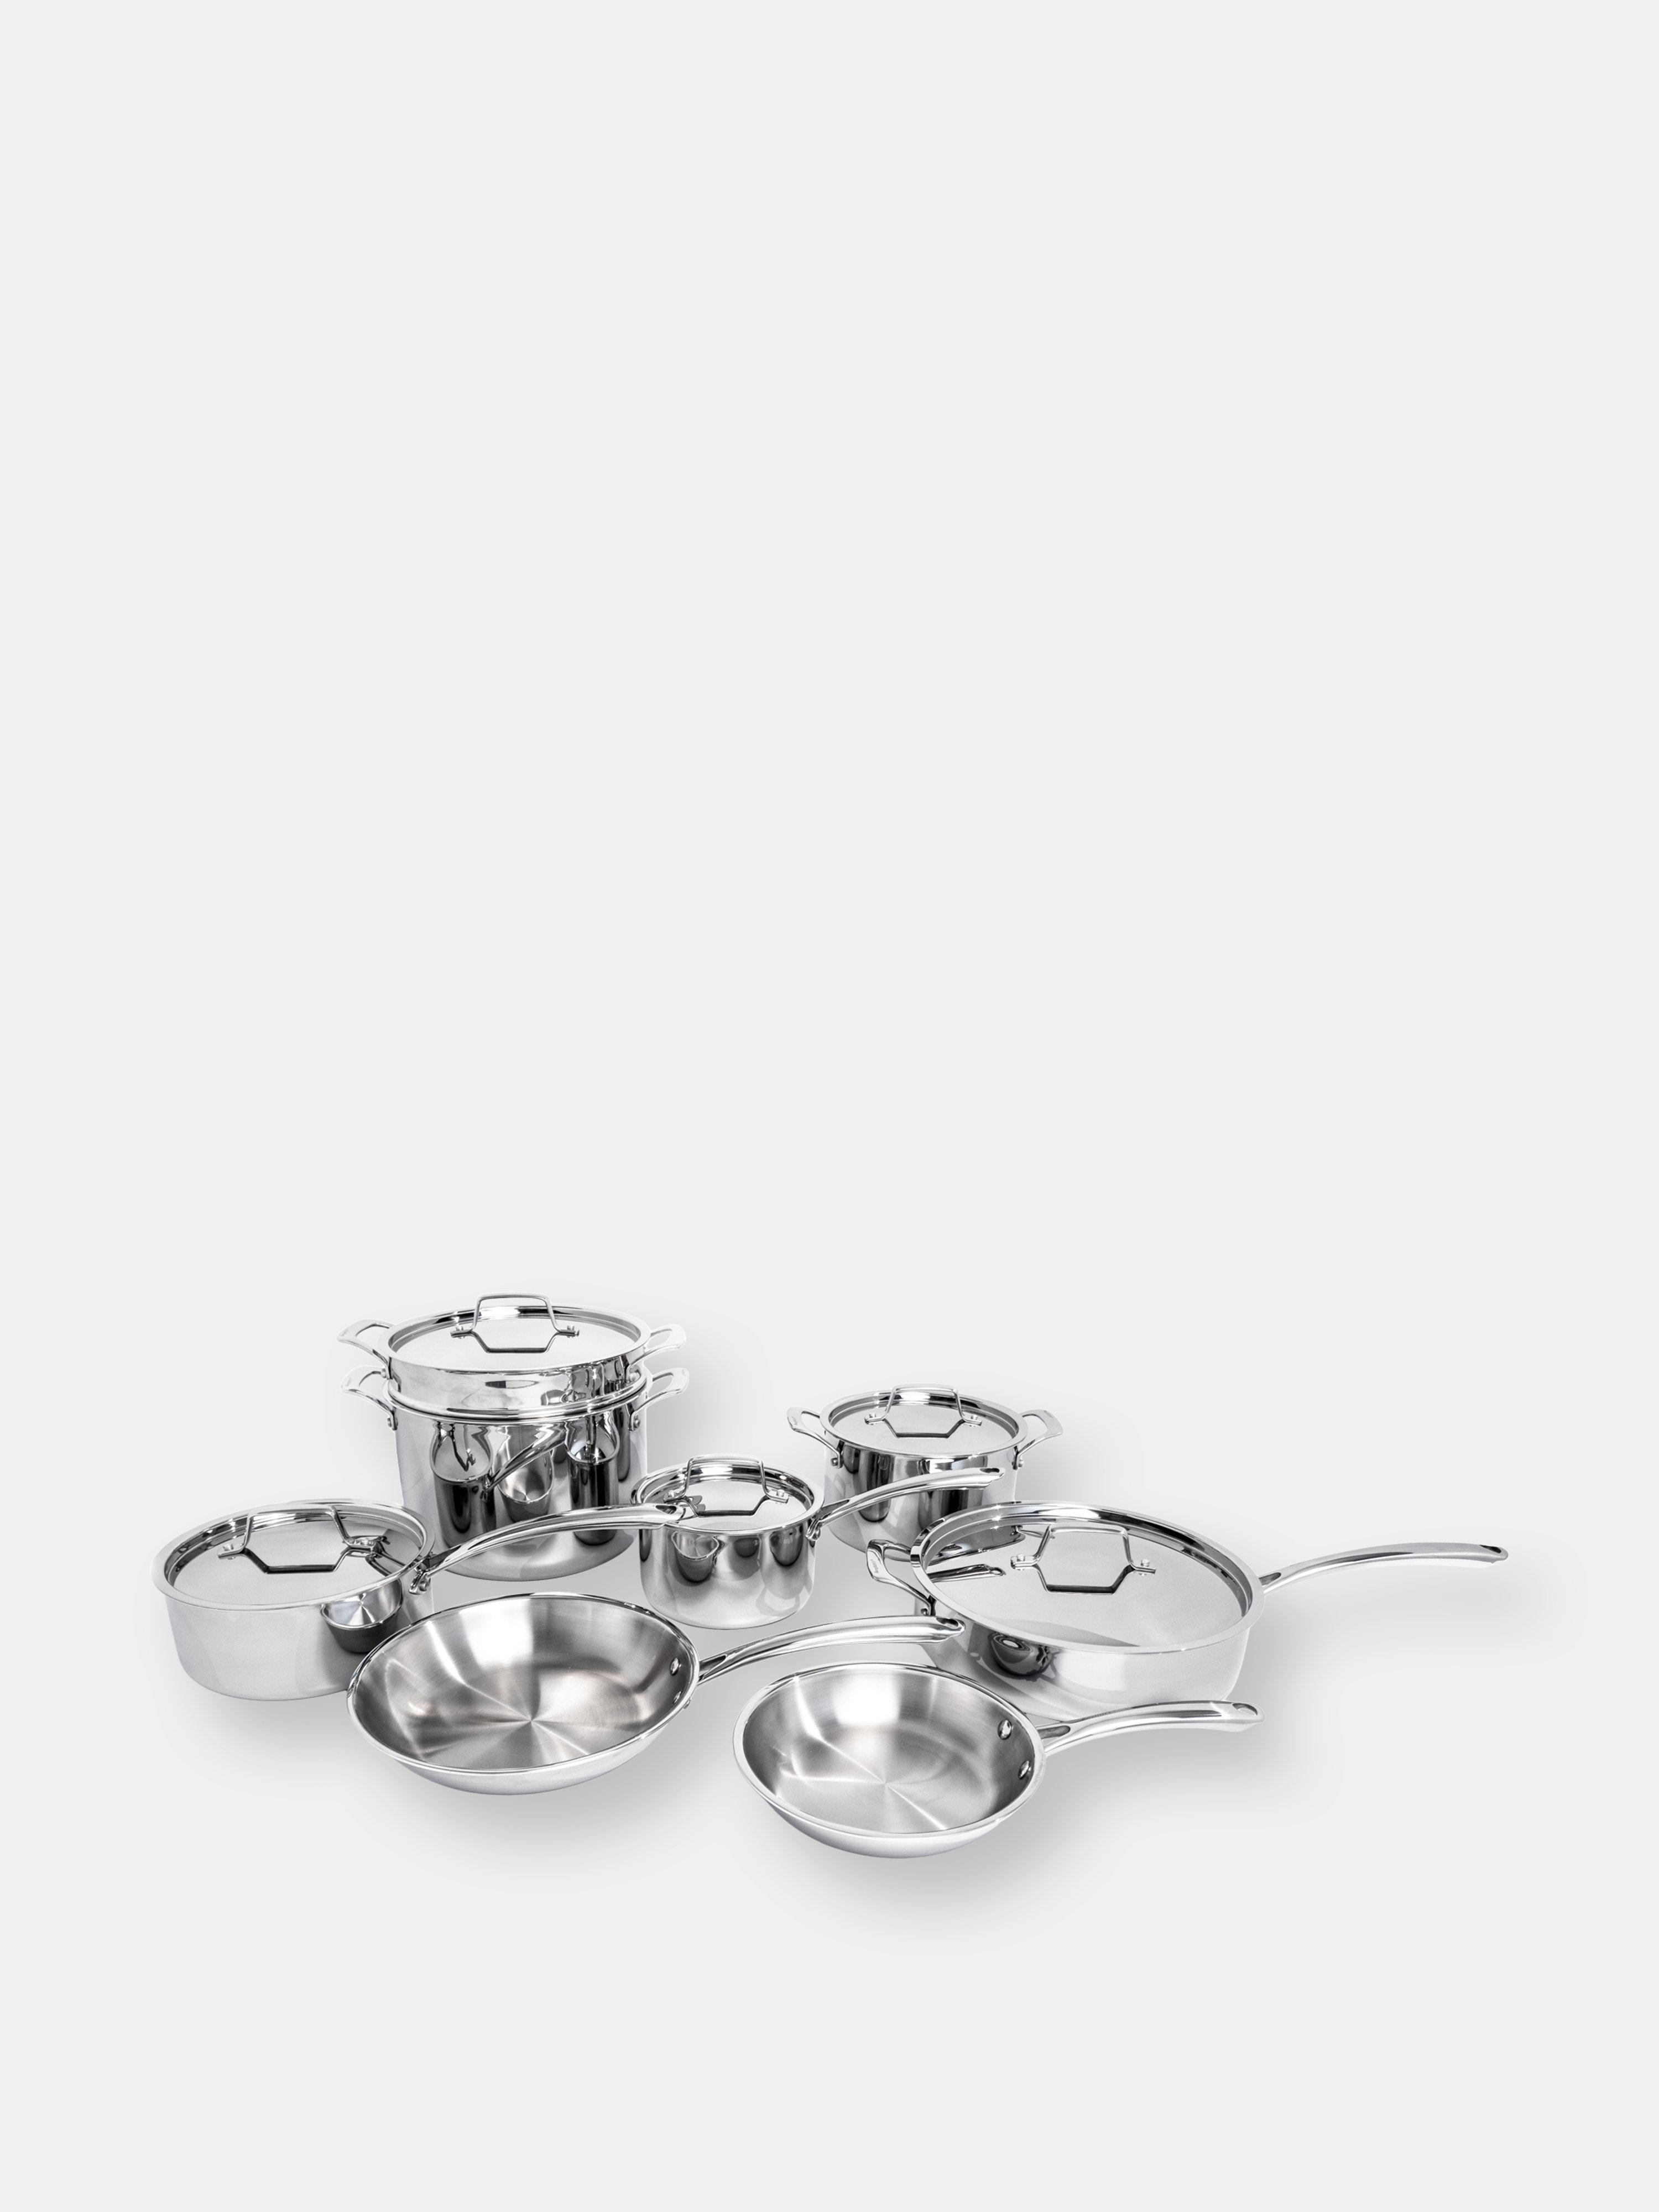 https://assets.verishop.com/berghoff-professional-13pc-stainless-steel-18-10-tri-ply-cookware-set/M05413821340951-2919828393?w=3000